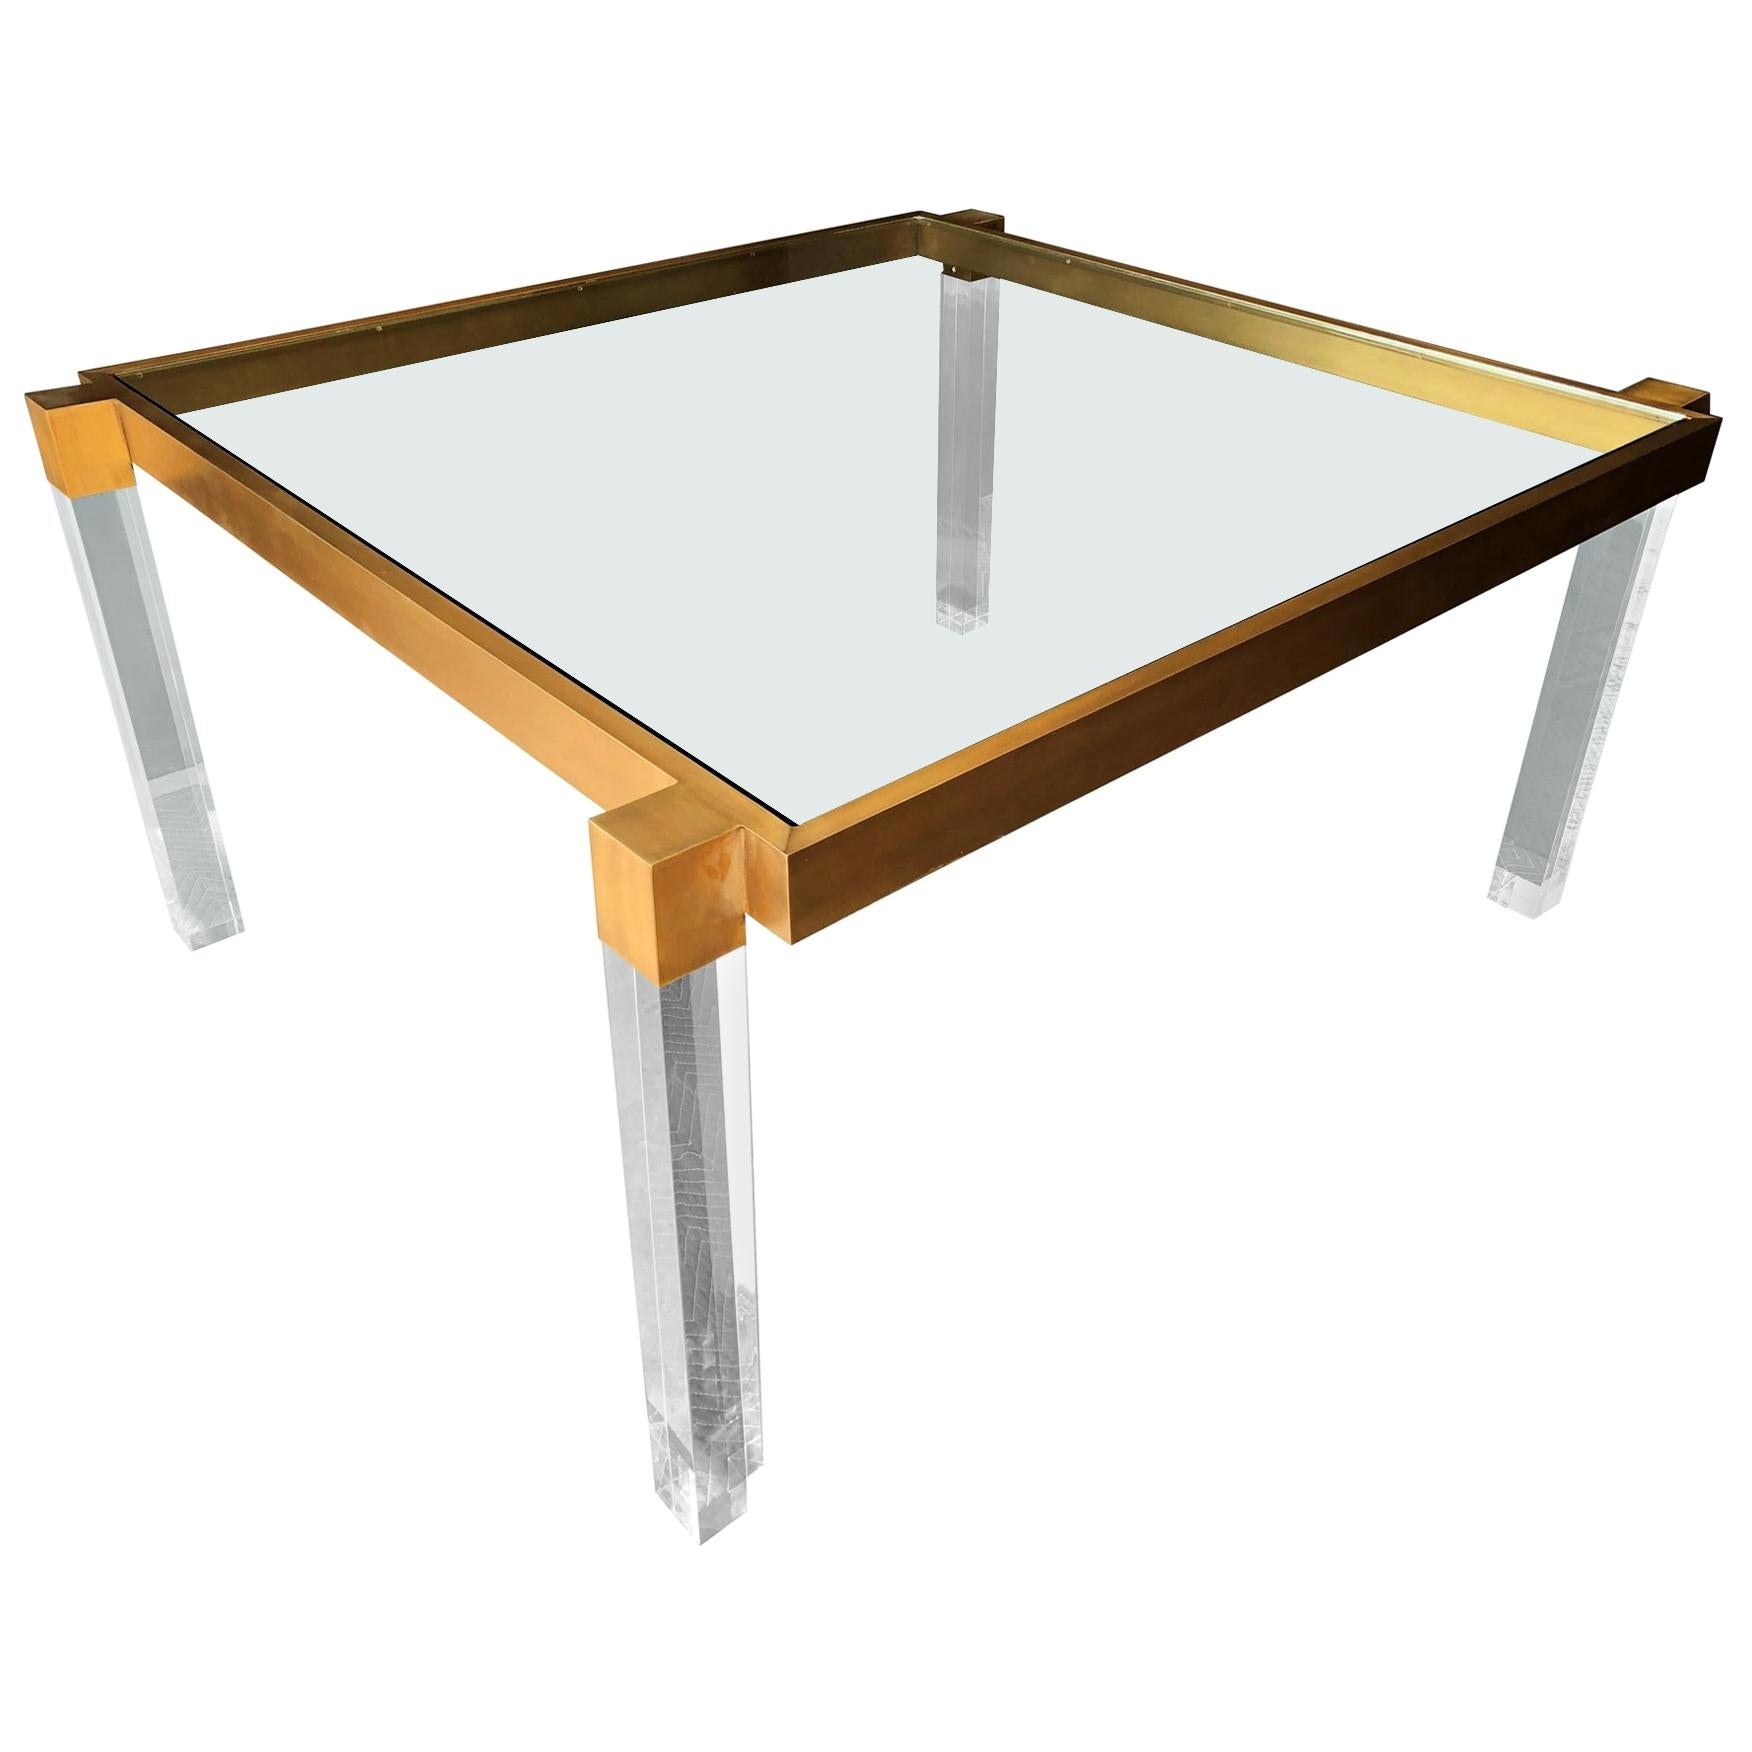 Charles Hollis Jones "Box Line" Dining Table in Lucite and Antique Solid Brass